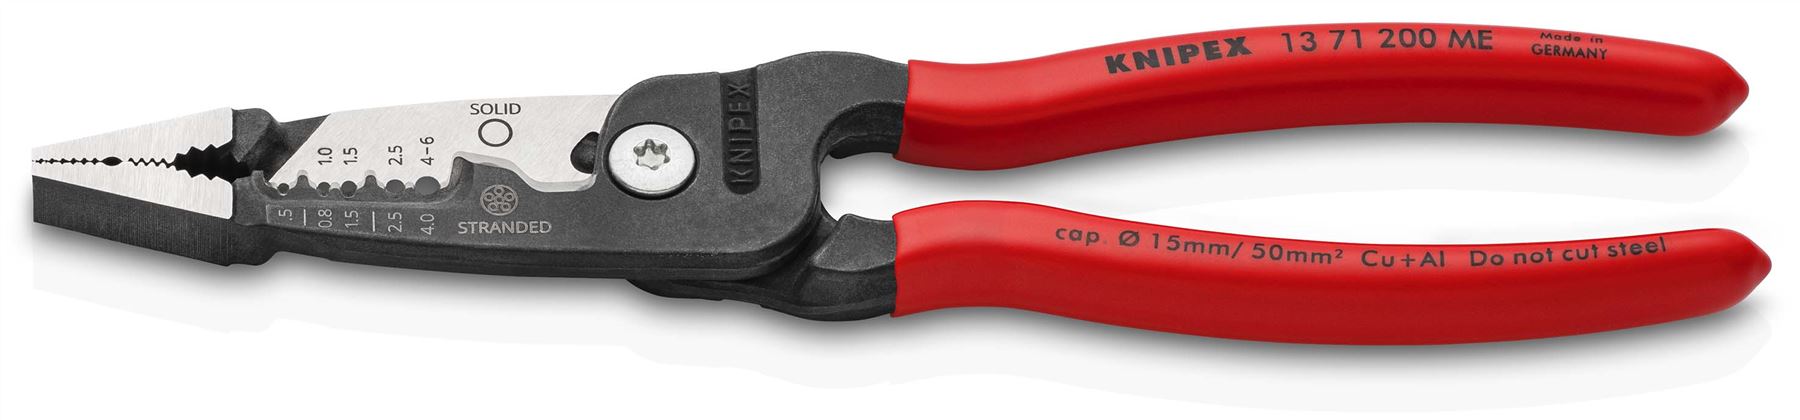 Knipex WireStripper Stripping Pliers 200mm Metric Version 13 71 200 ME